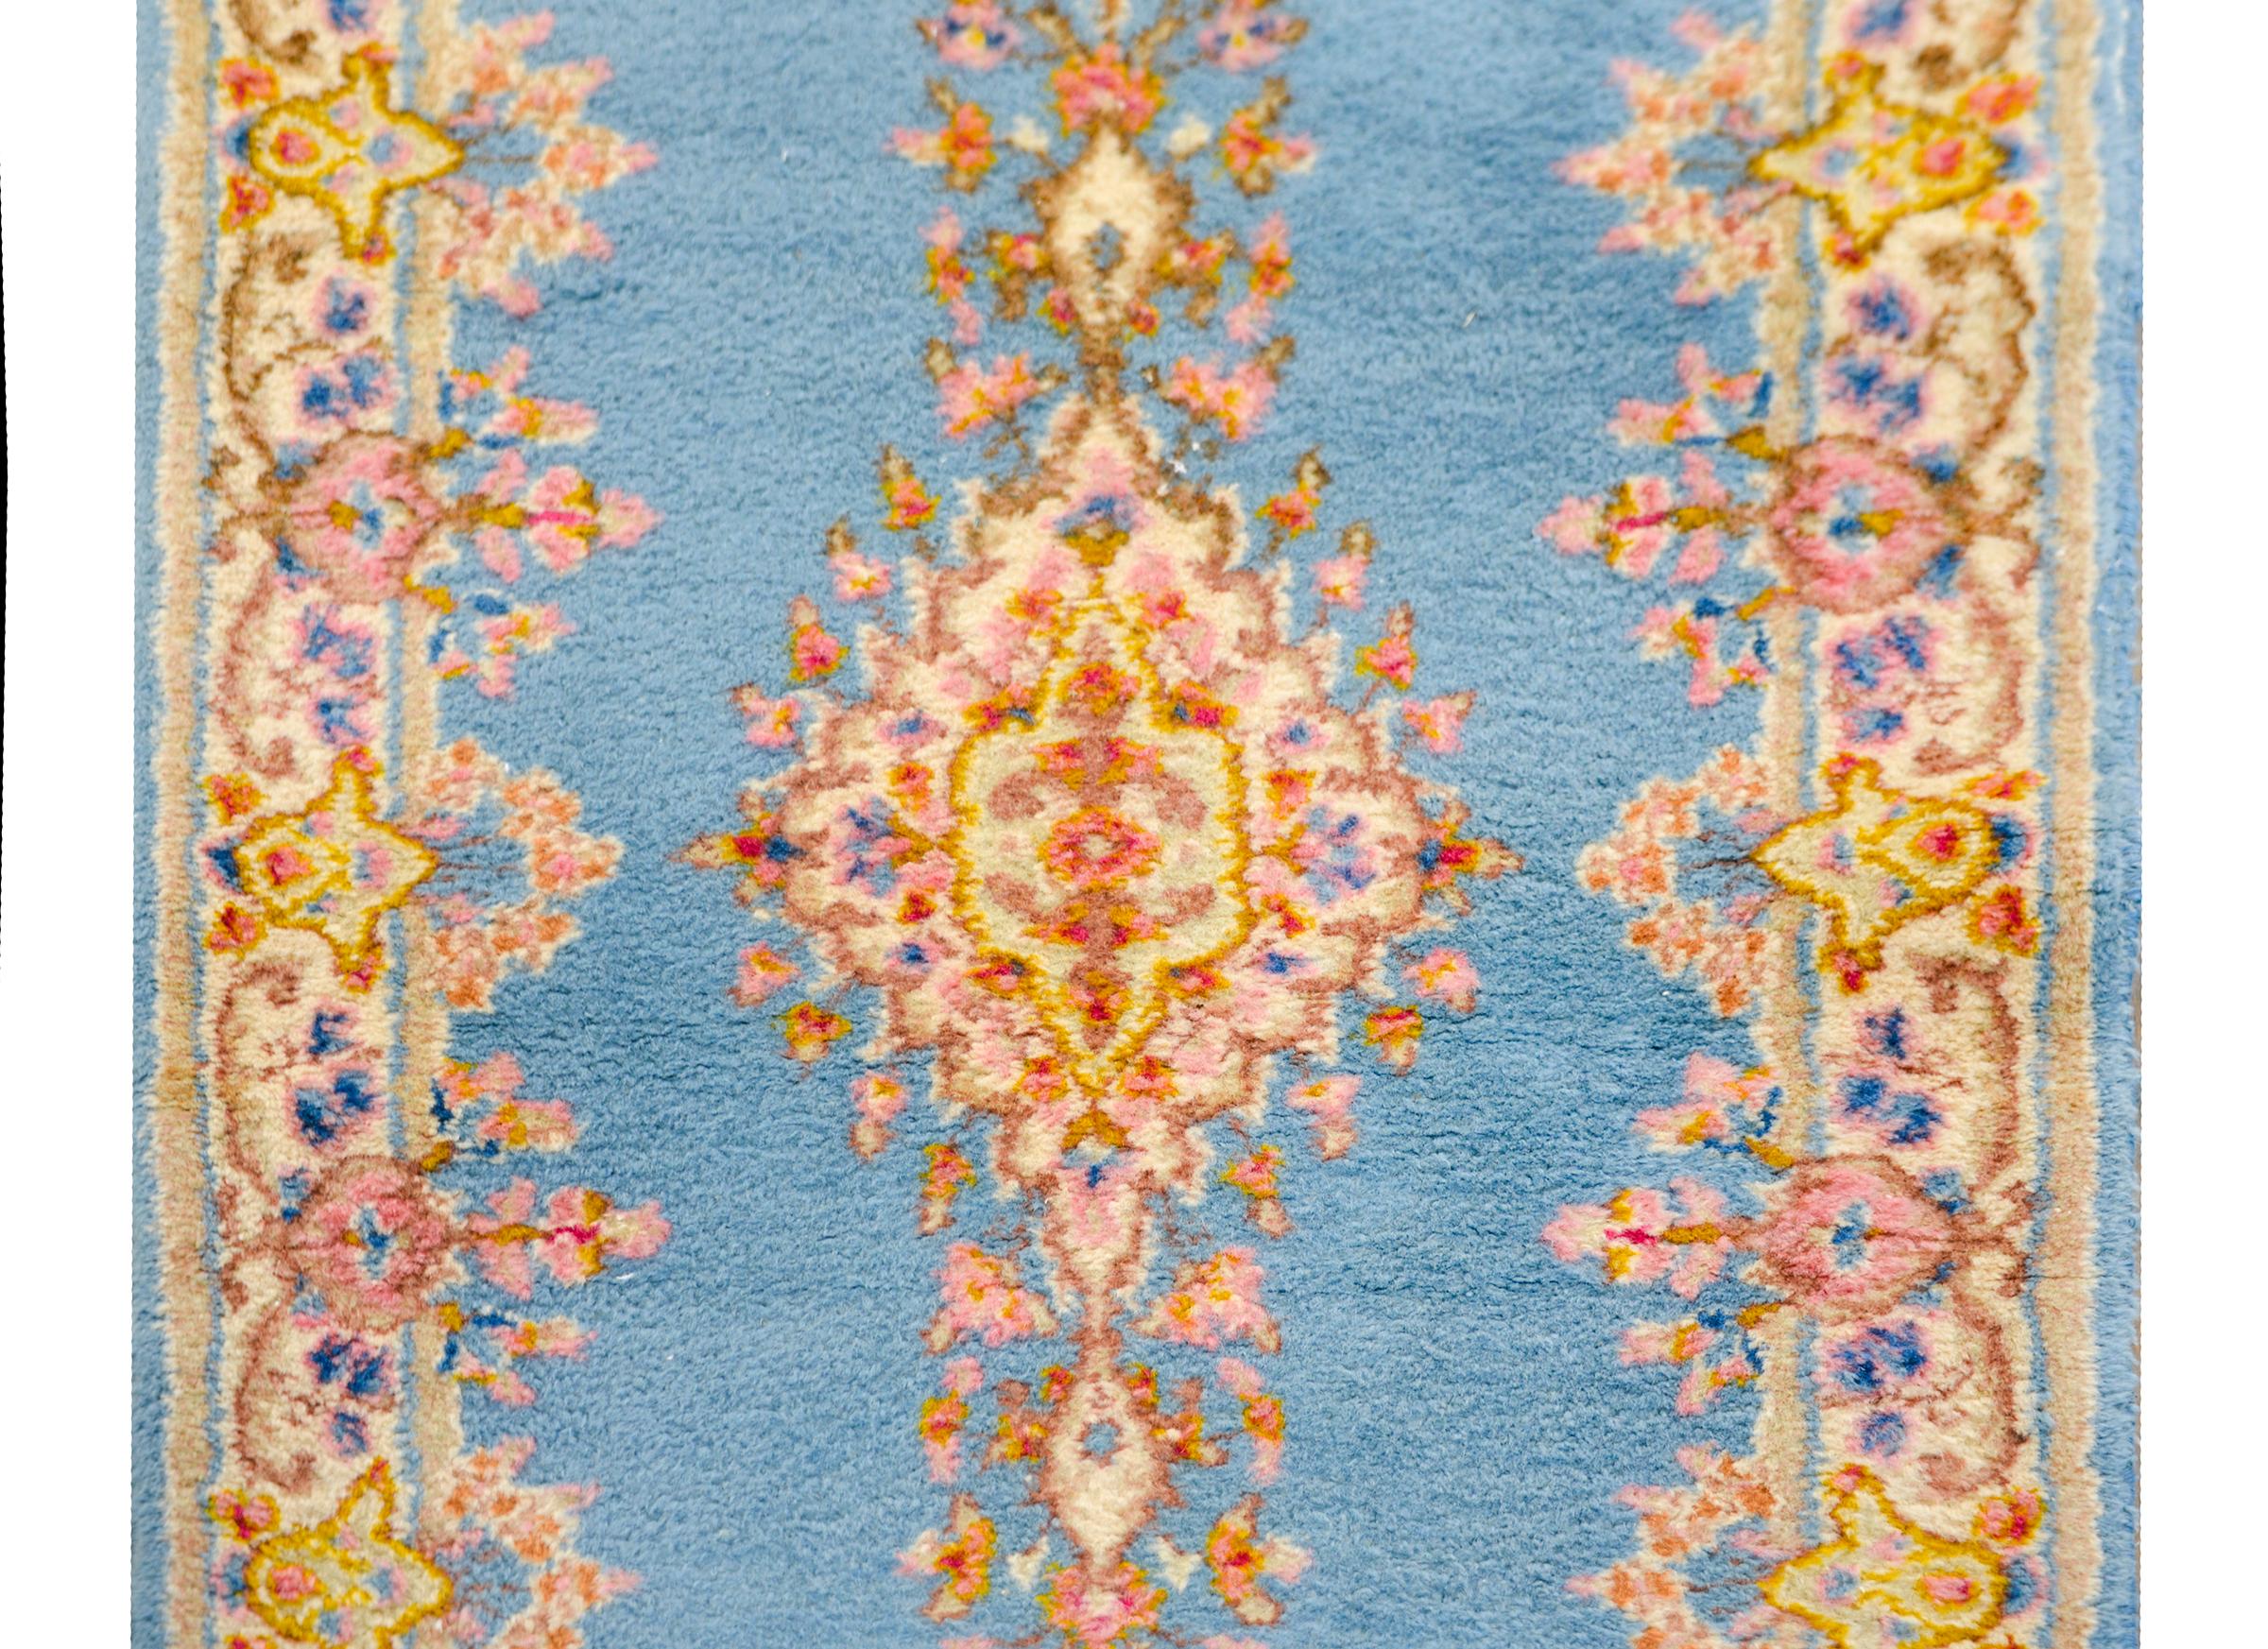 A sweet early 20th century Persian Kirman runner with a delicately rendered floral pattern woven in pinks, yellows, whites, and reds, set against a pale indigo background, and surrounded by a similarly patterned floral border.